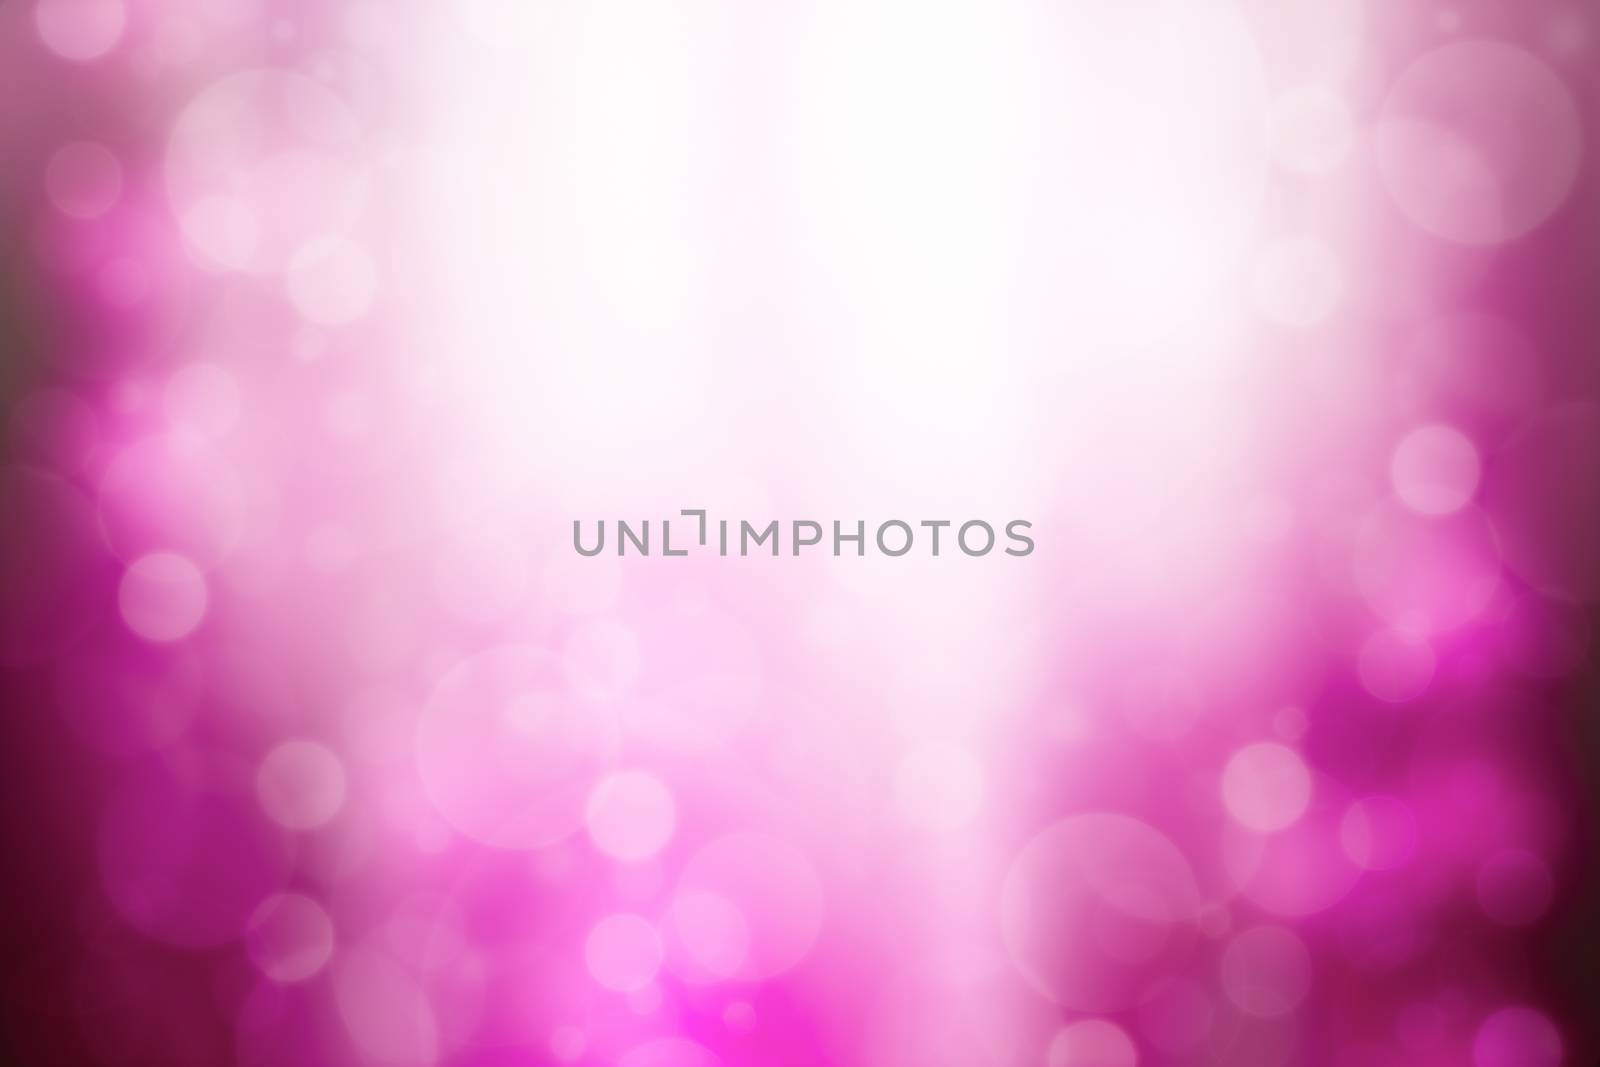 Pink abstract background with bokeh and sun rays